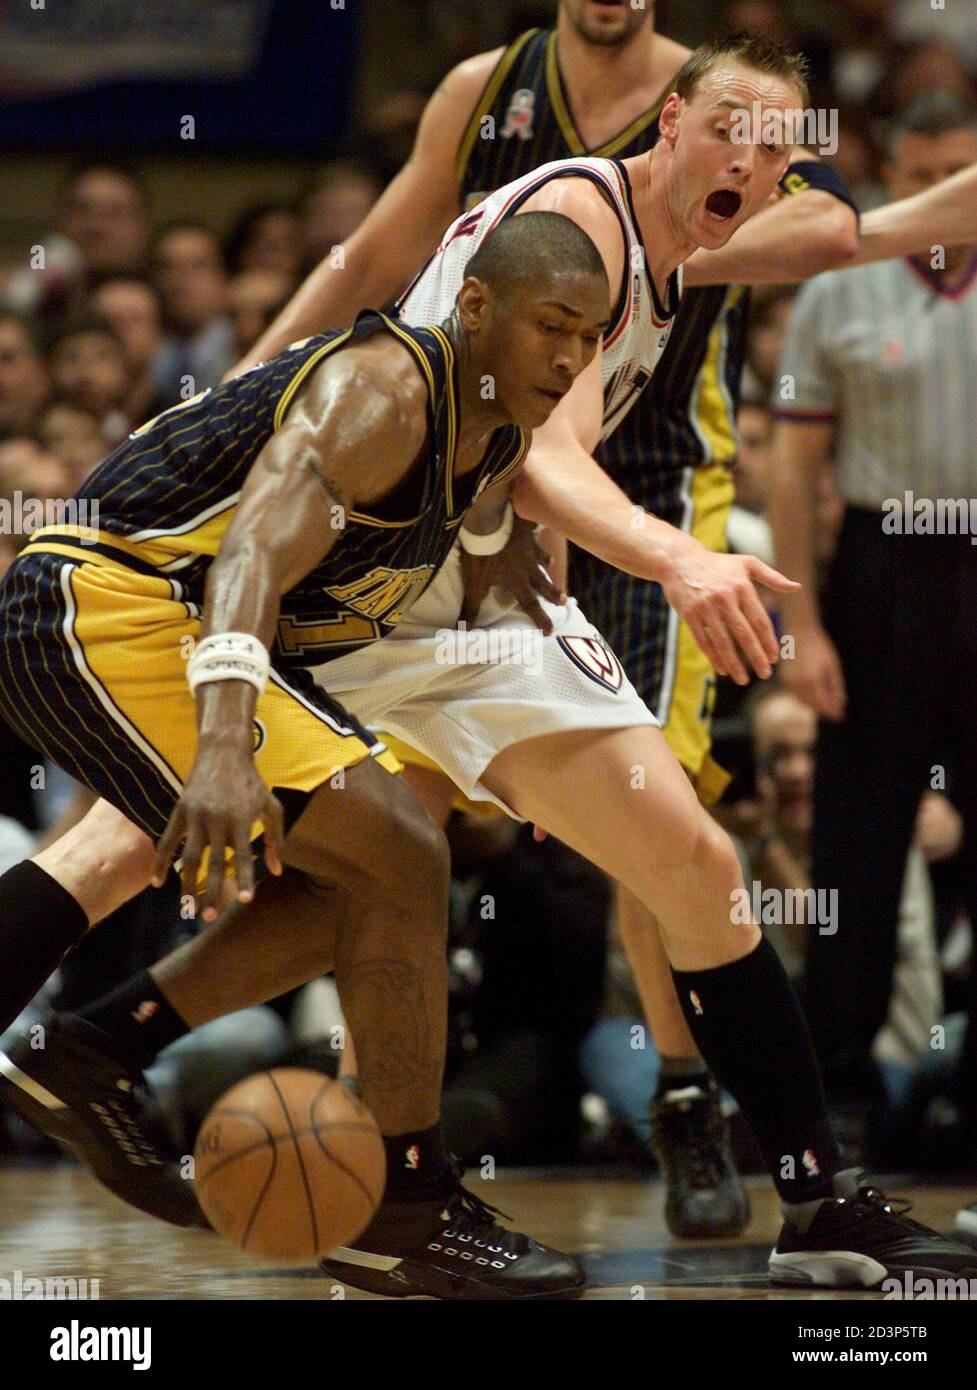 Indiana Pacers forward Ron Artest (L) battles the defense of New Jersey  Nets forward Keith Van Horn for the ball during the first quarter of Game 5  of their NBA playoff series